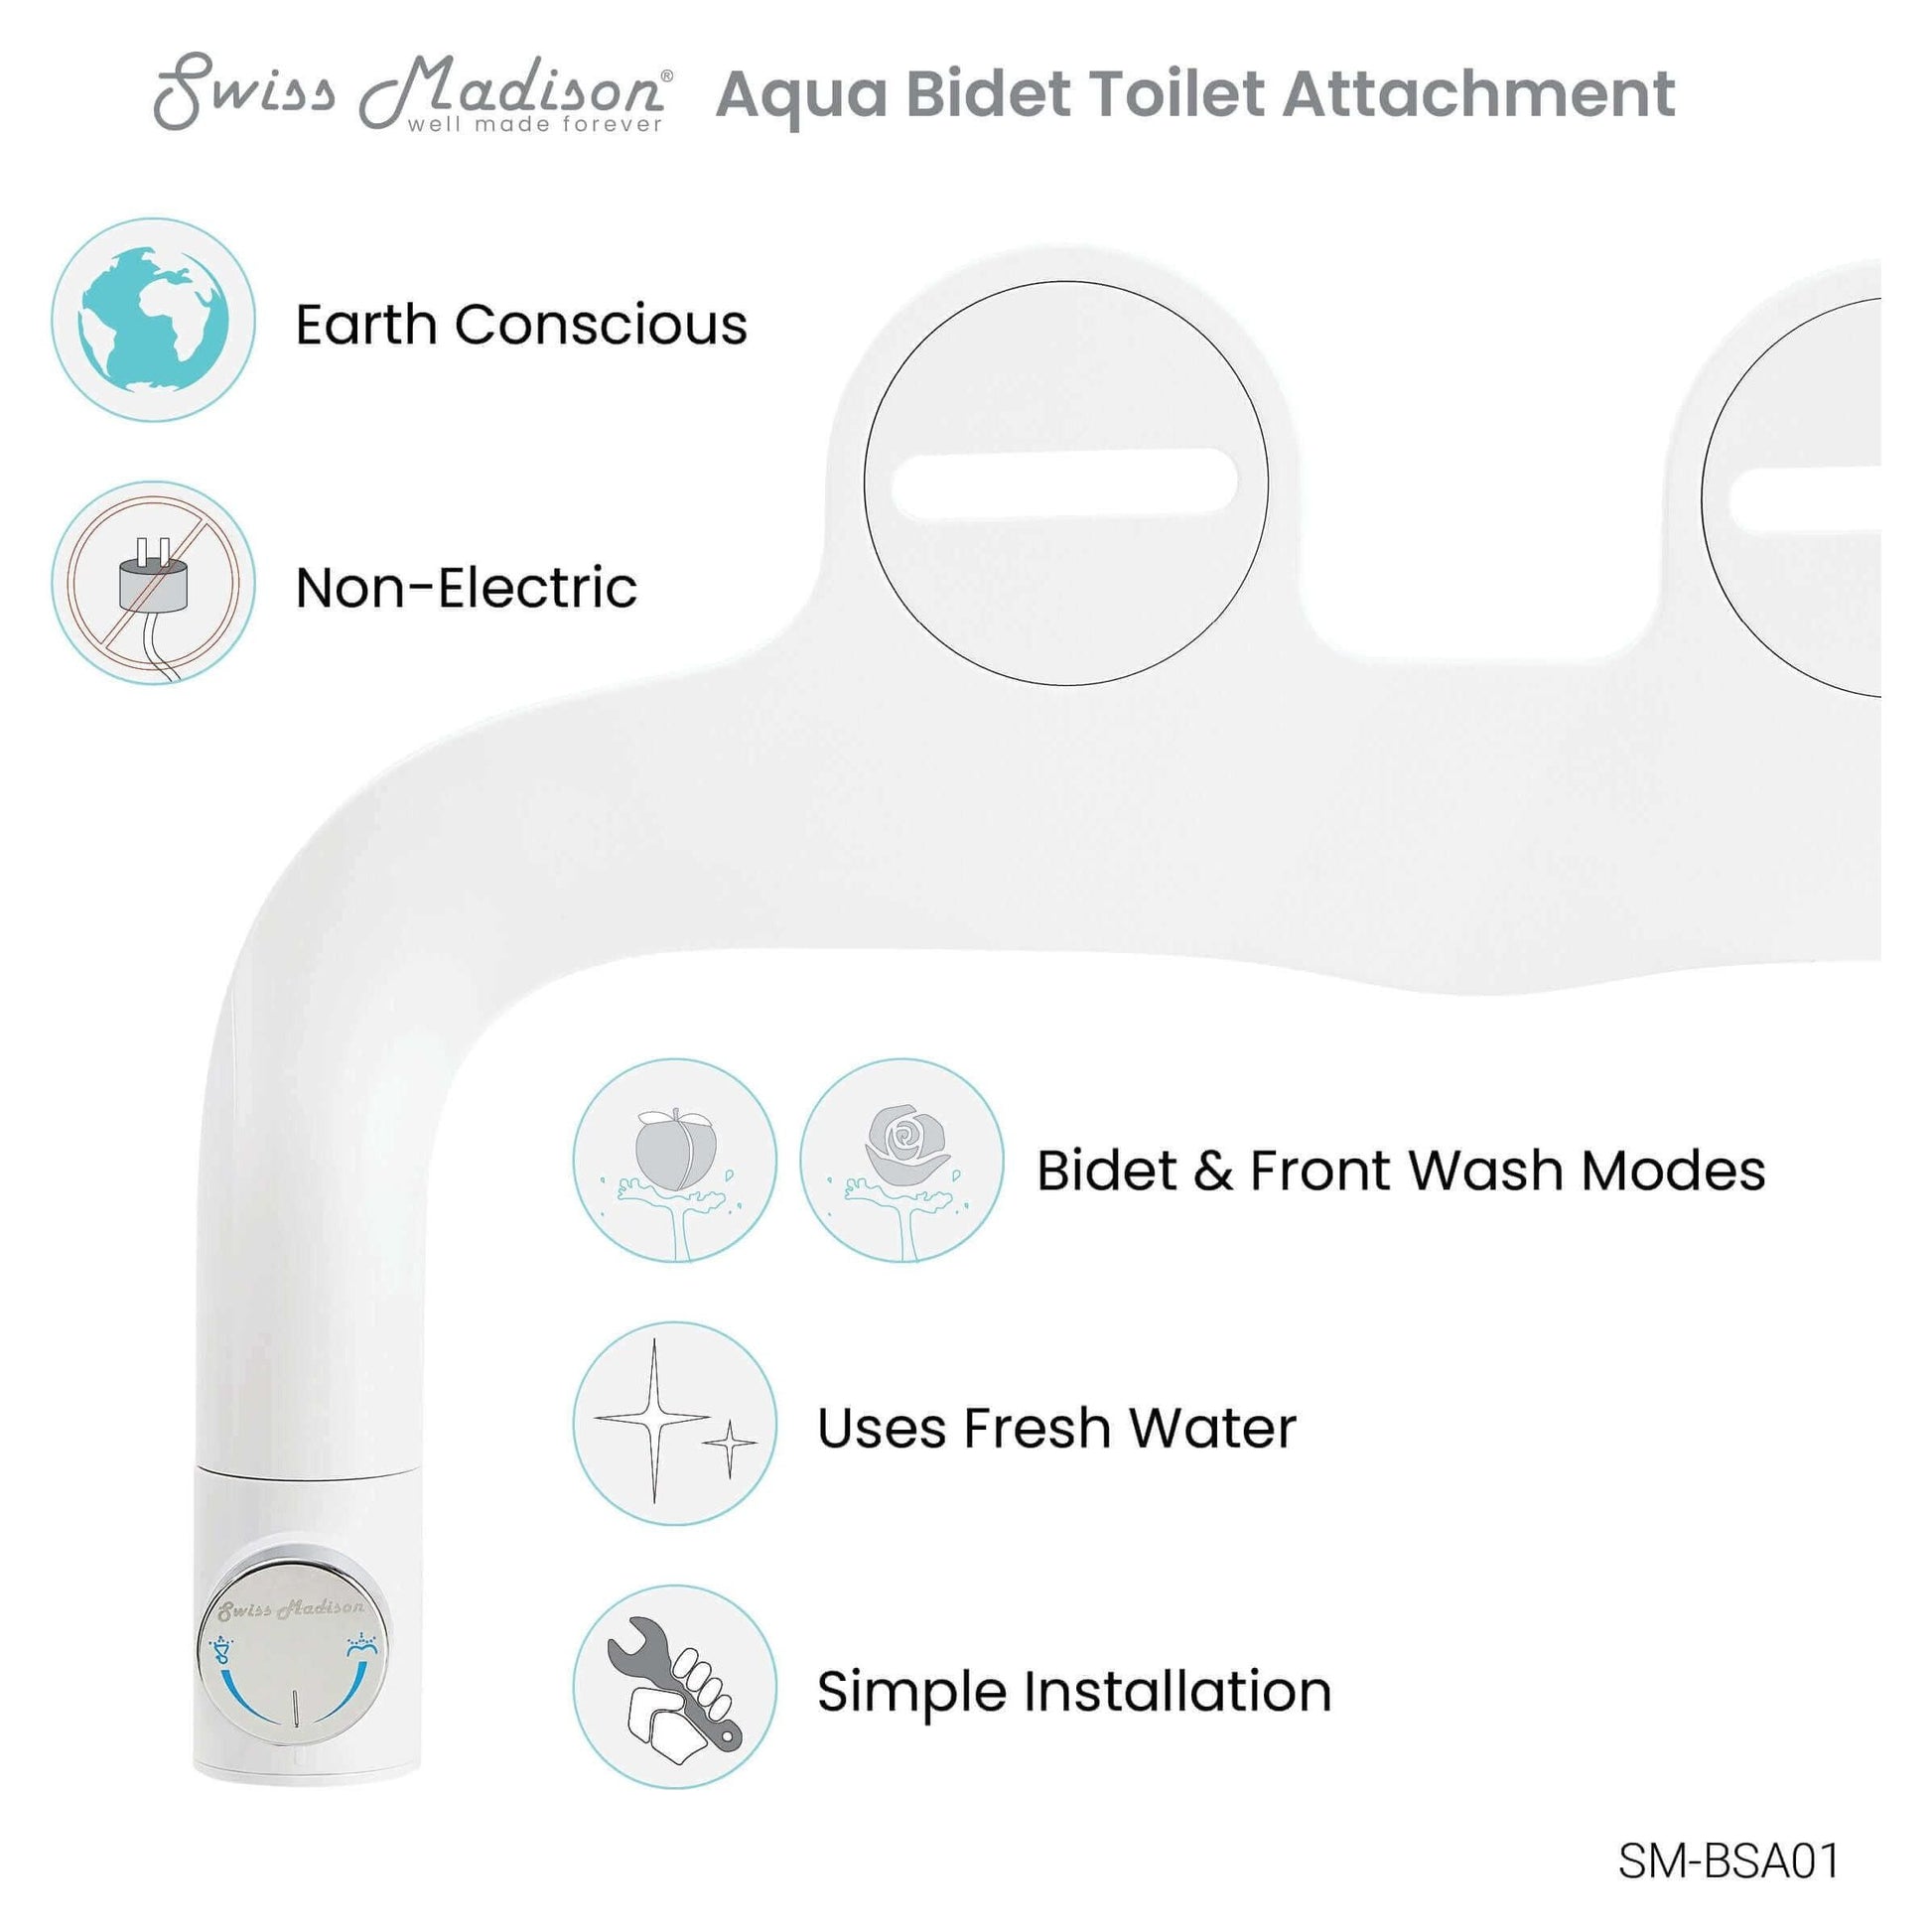 Aqua Non-Electric Bidet Toilet Attachment - top view with features listed